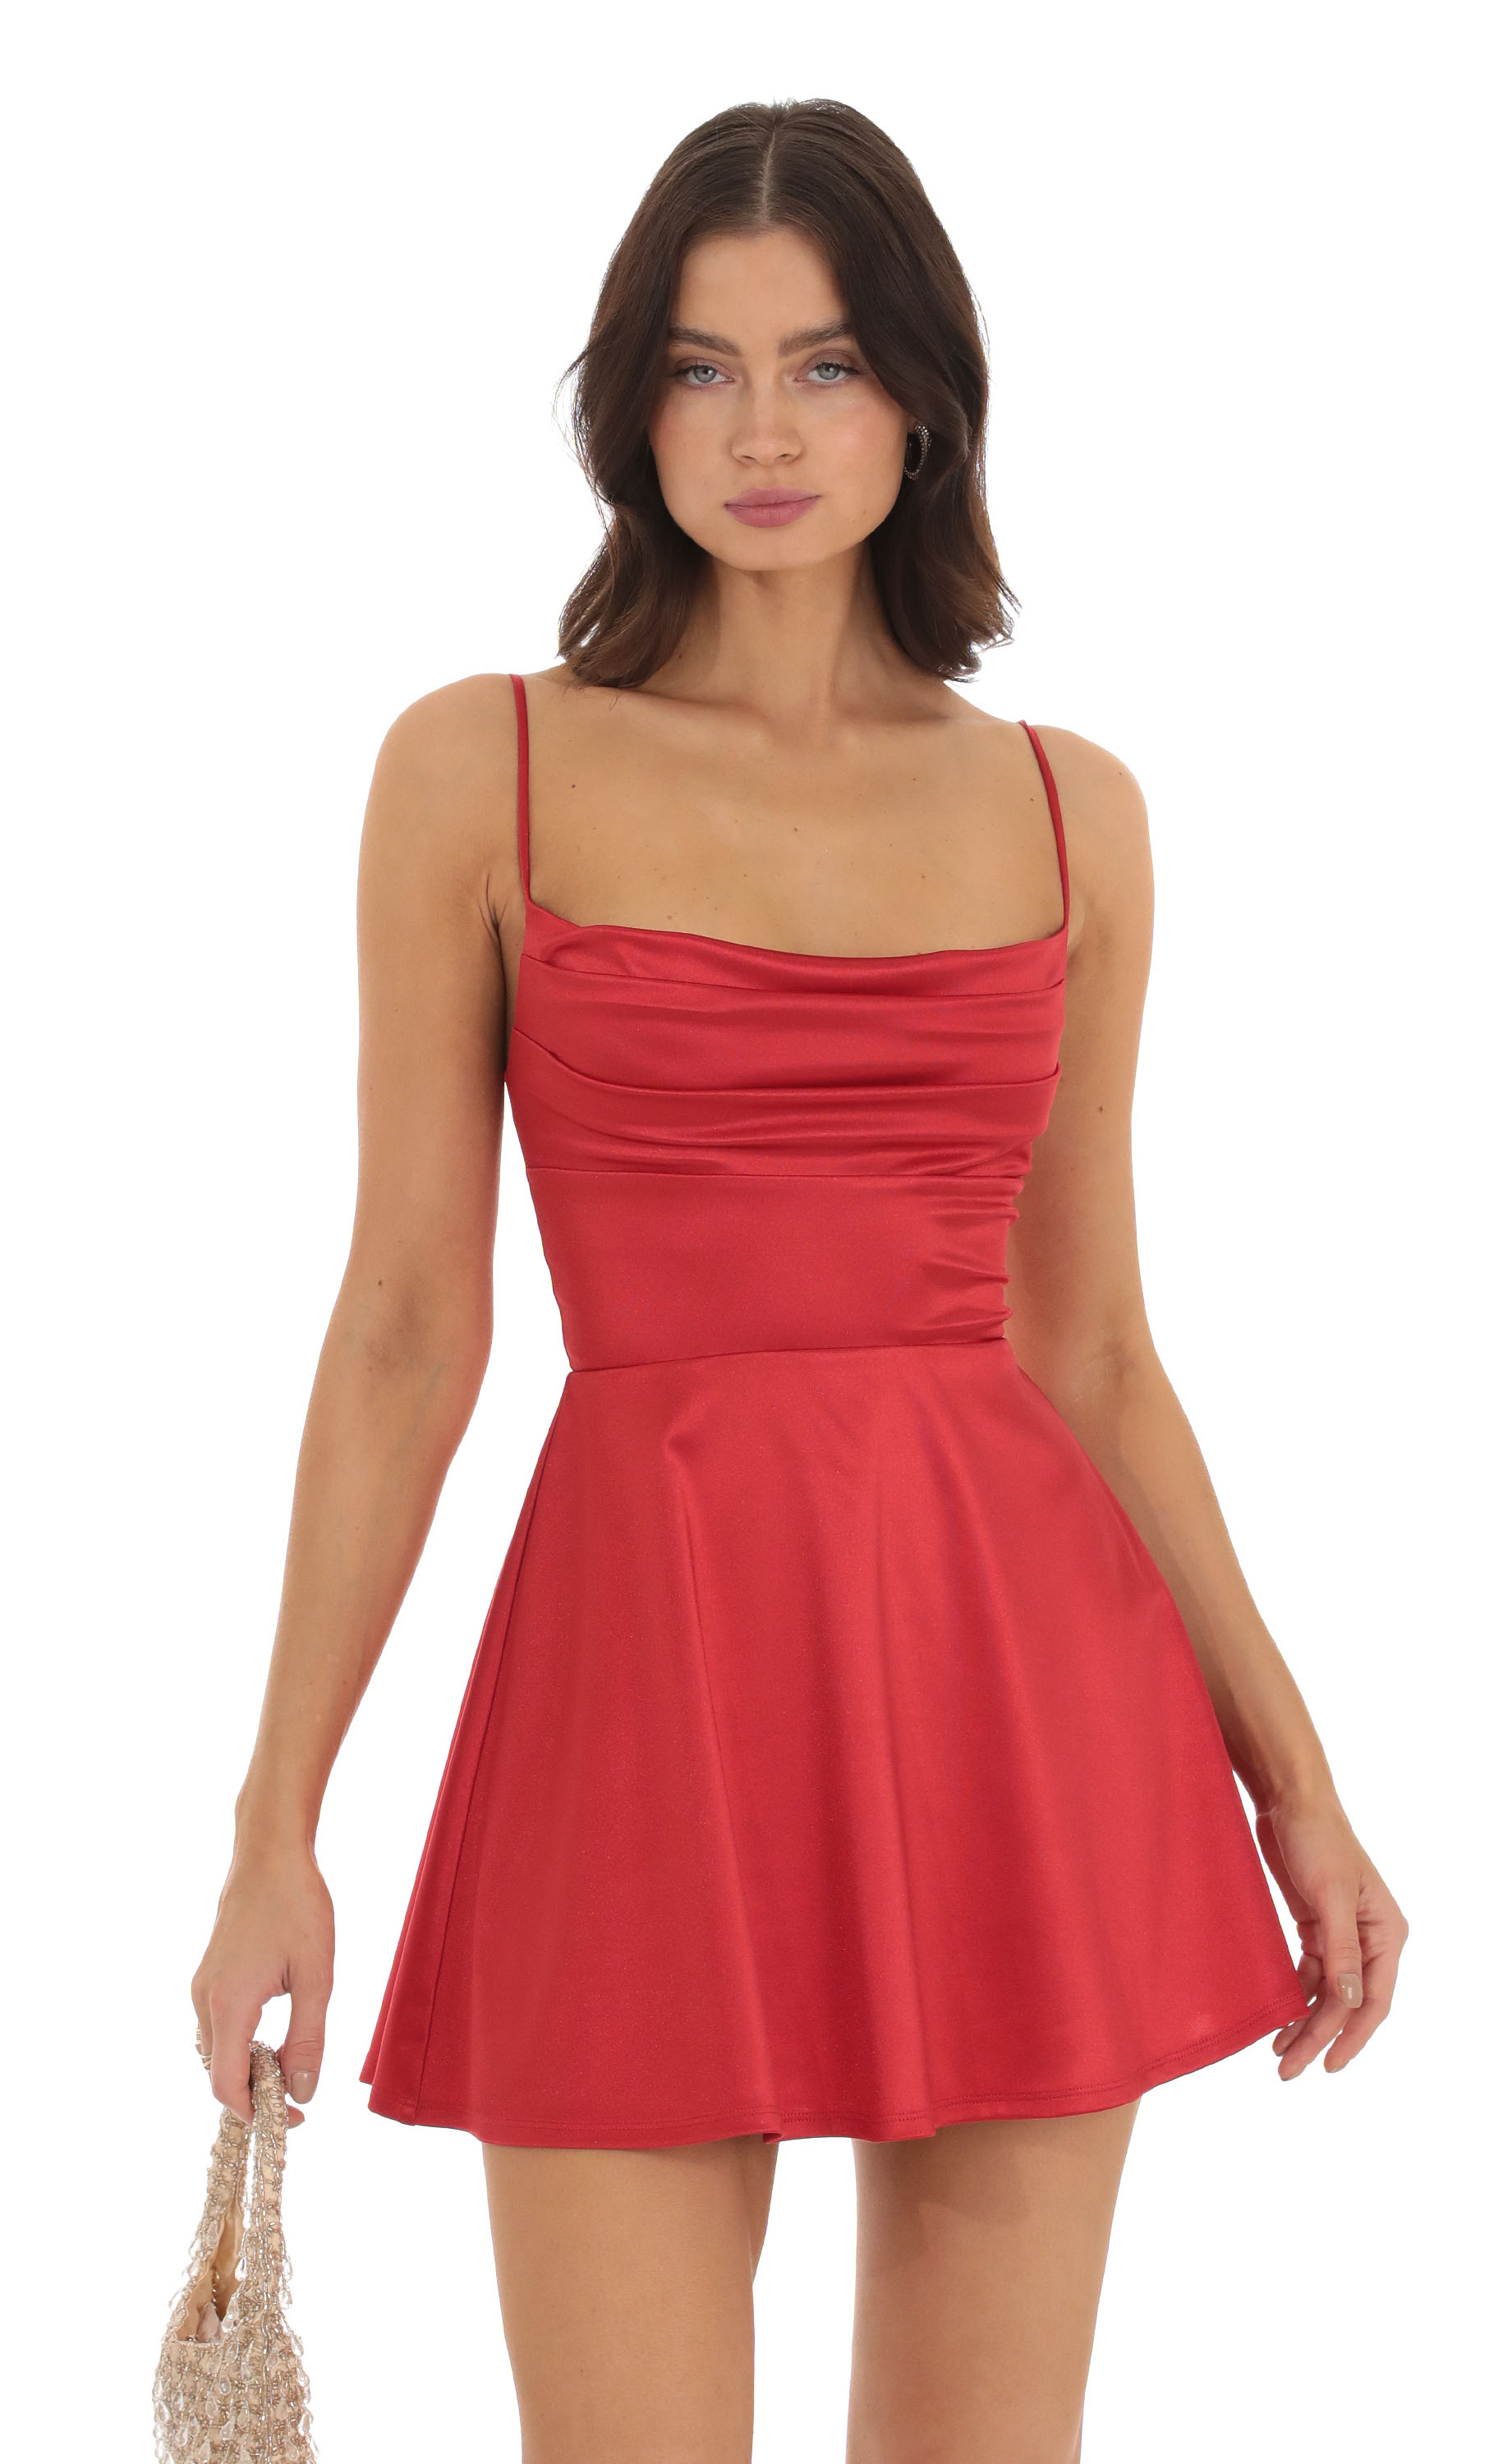 Jewel Satin Cowl Neck Dress in Red